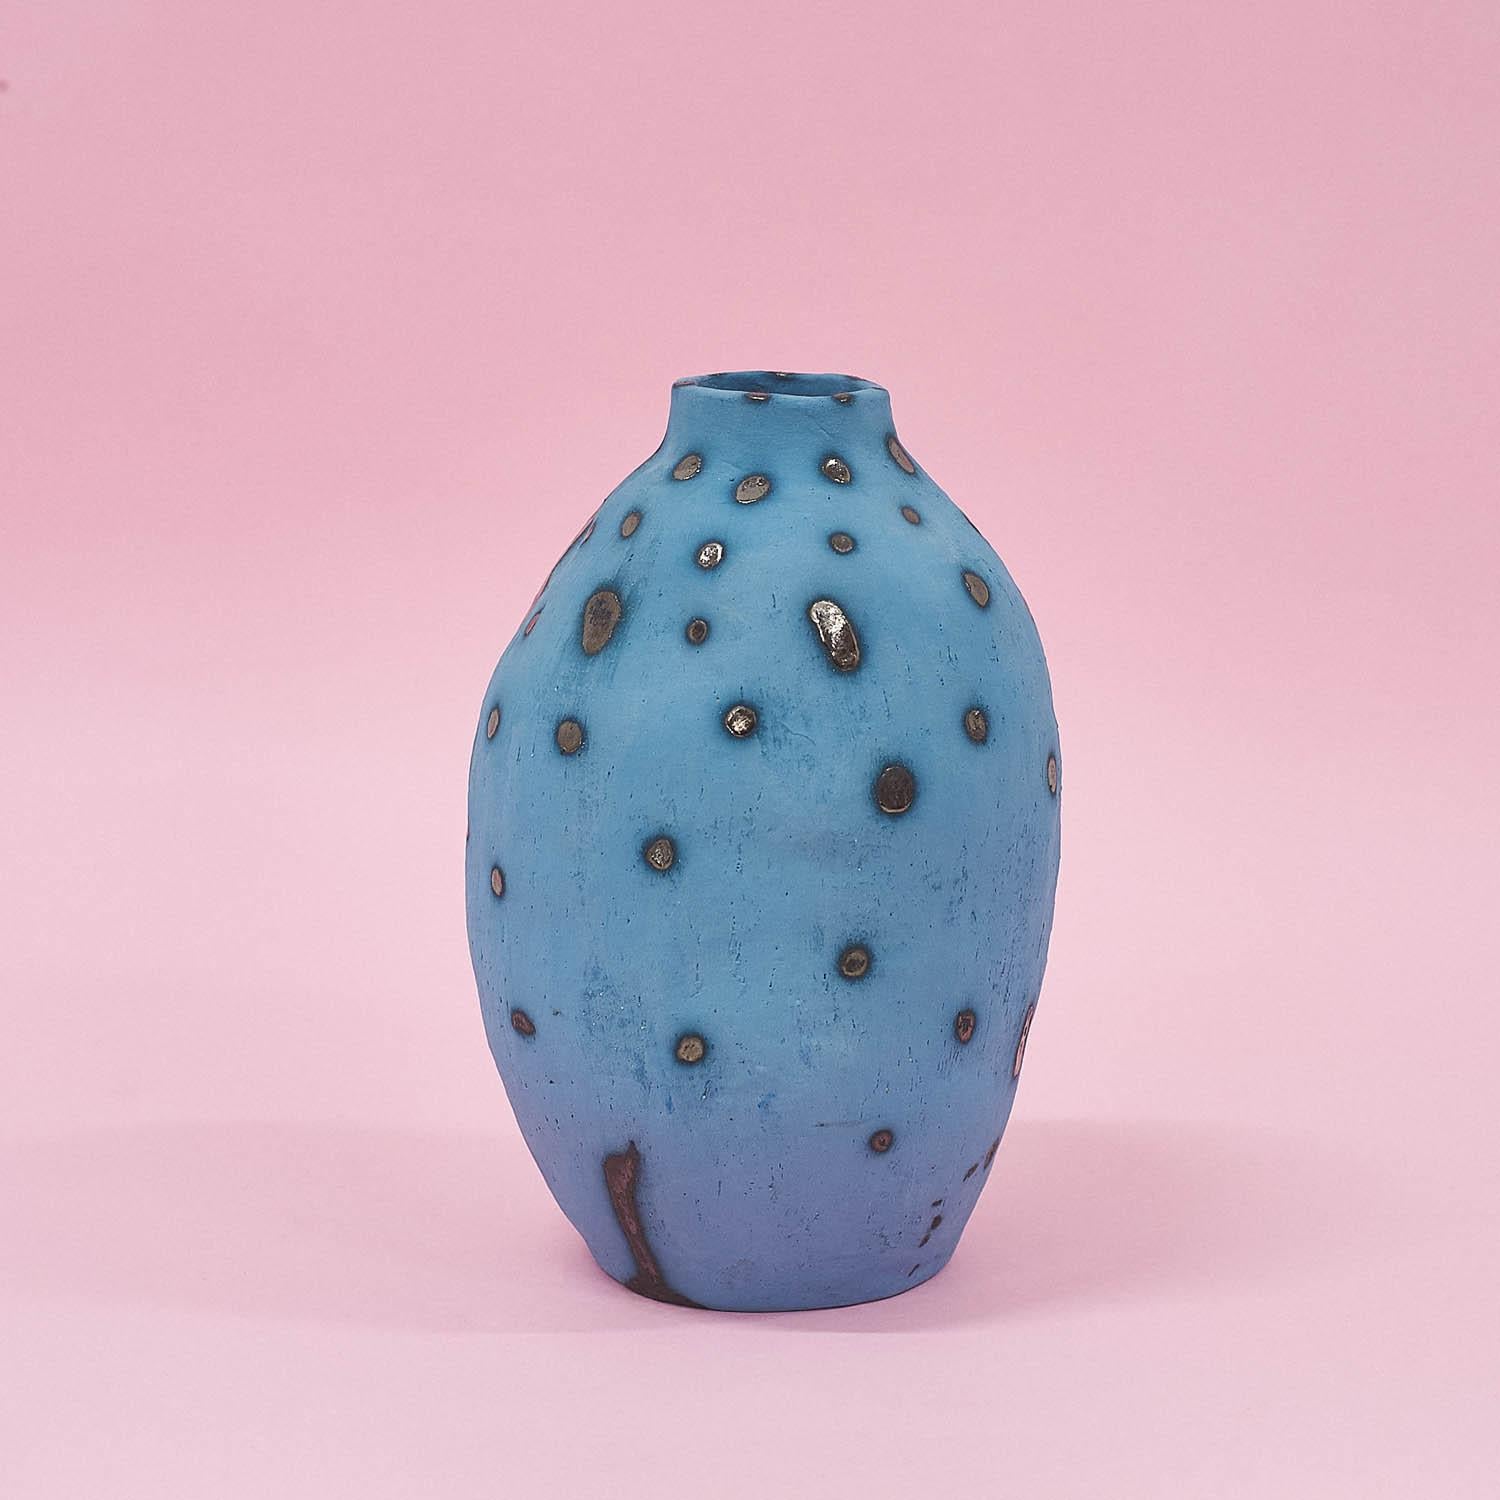 Papaya vase by Siup Studio
Dimensions: D13 x H21cm
Materials: Ceramics

Siup is a small design studio based in Warsaw. The concept is created by three friends – Martyna Dymek, Marcin Sieczka and Kasia Skoczylas – who have met in University of